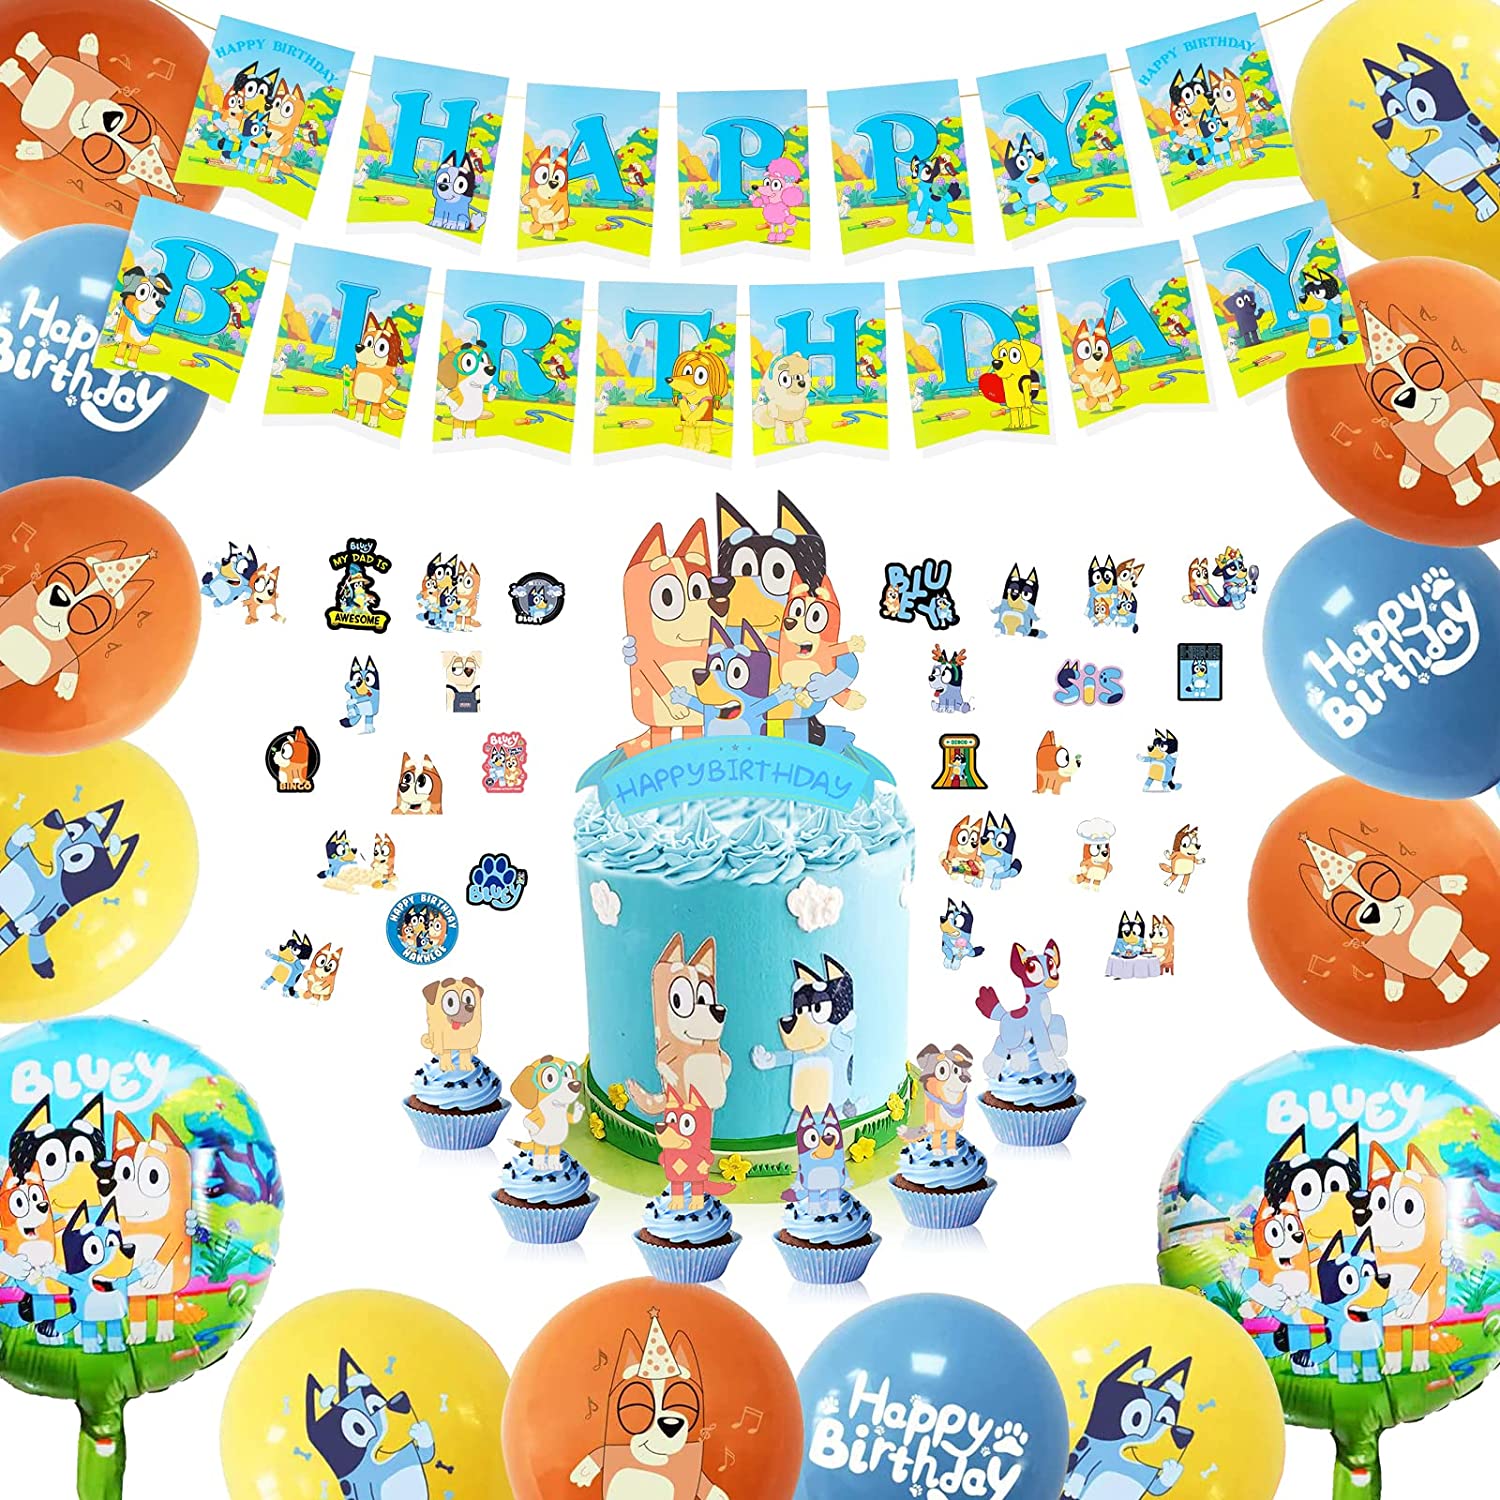 Bluey Birthday Party Supplies Bluey Party Decorations Bluey Birthday Banner Balloons Cake Cupcake Toppers Knifes Forks Spoons Tablecloth Plates Bluey Birthday Party Decor Baby Boys Girls Bday,Bluey Party Supplies 2nd Birthday。 